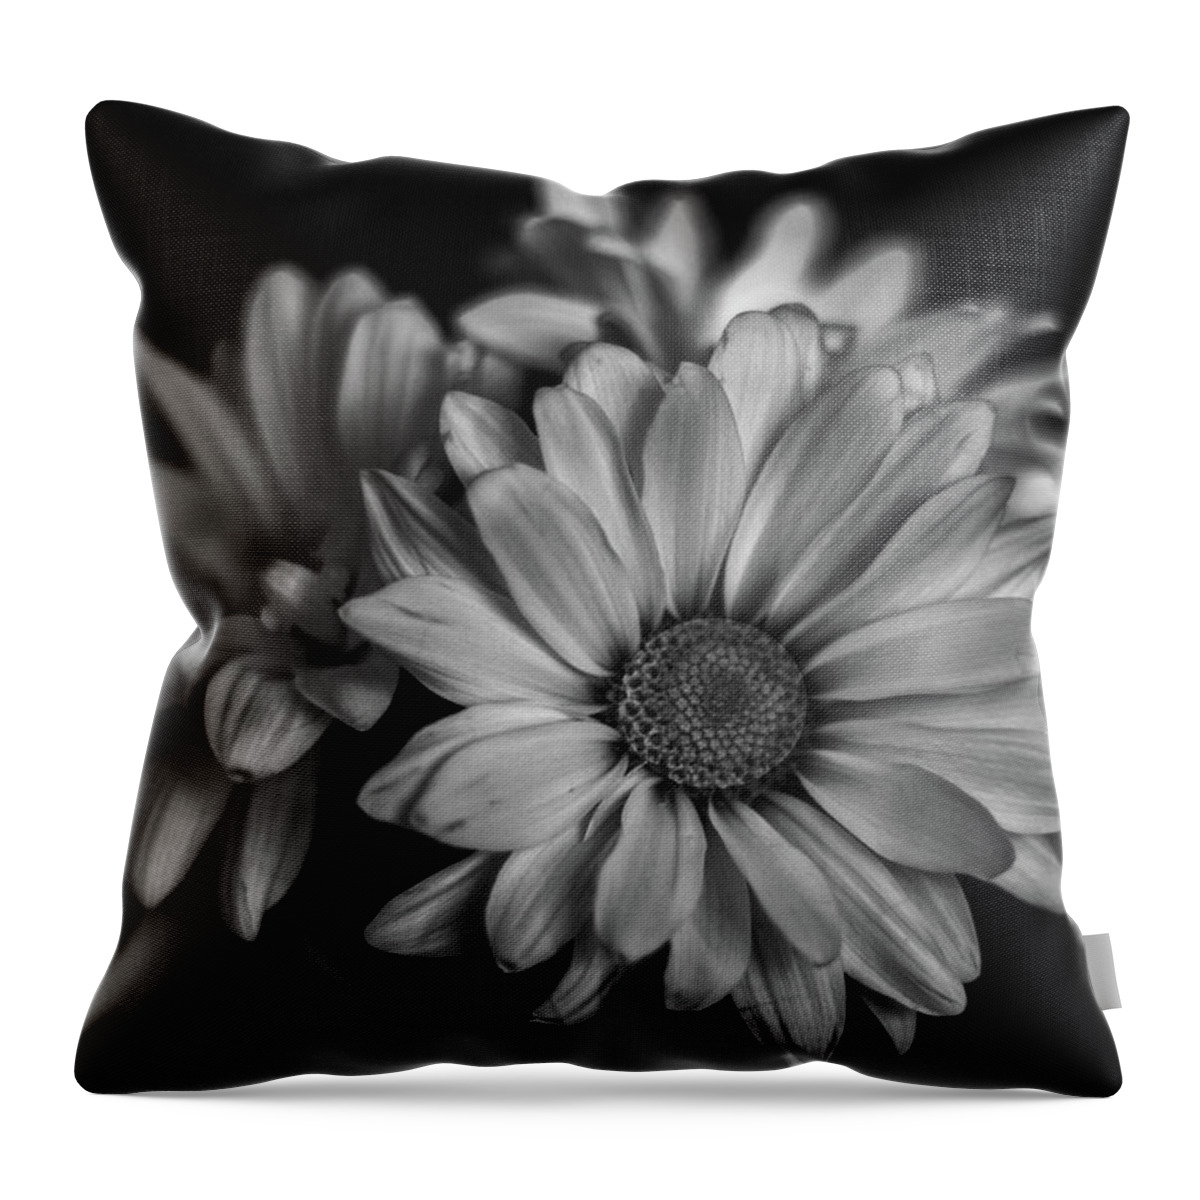  Throw Pillow featuring the photograph Daisies by Laura Terriere